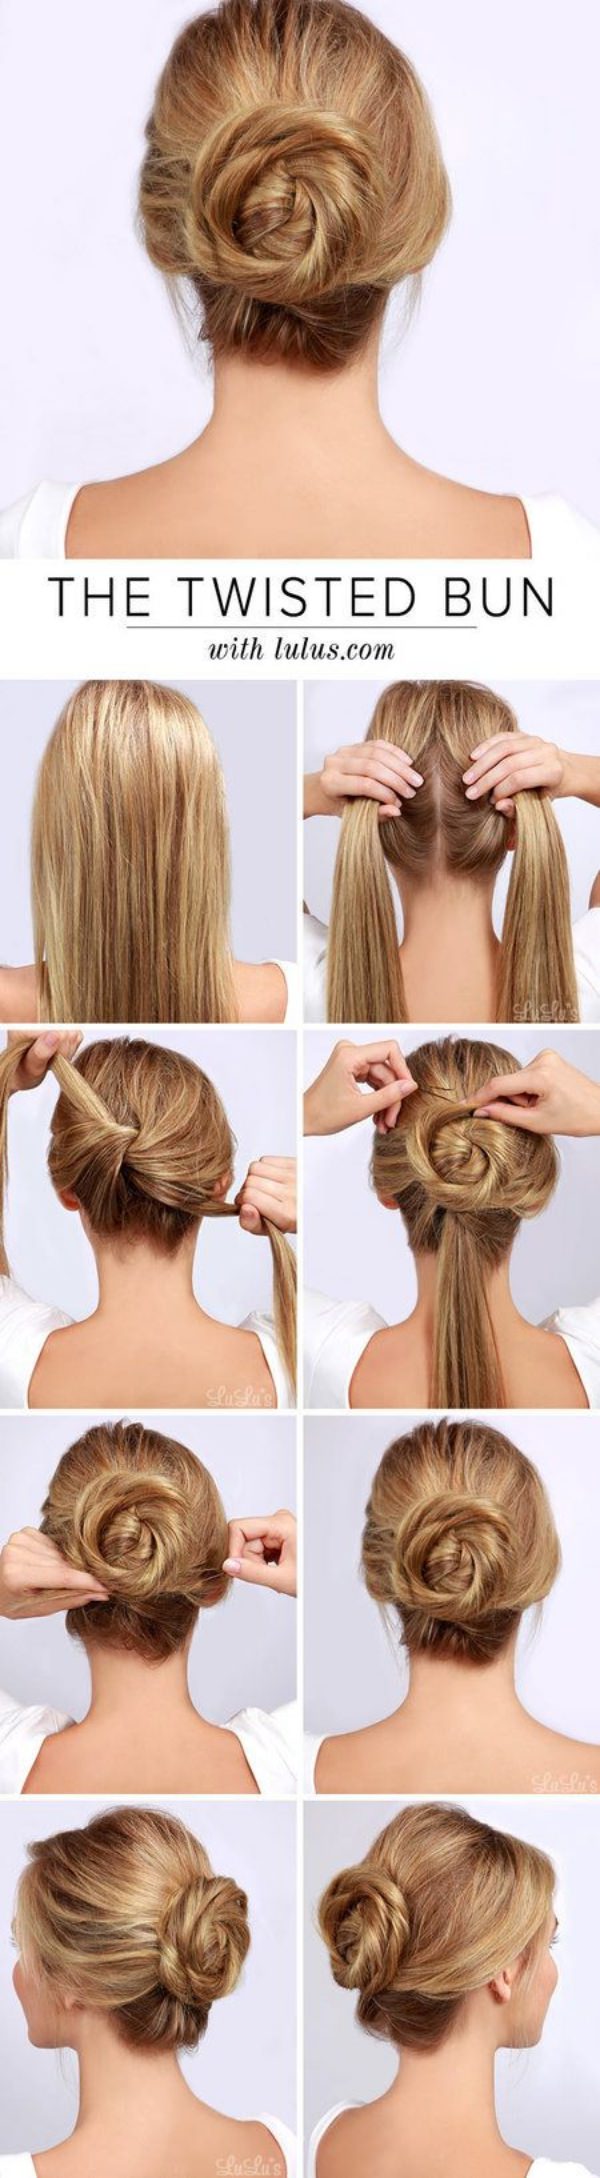 7-Hairstyles-that-can-be-done-in-3-Minutes-1